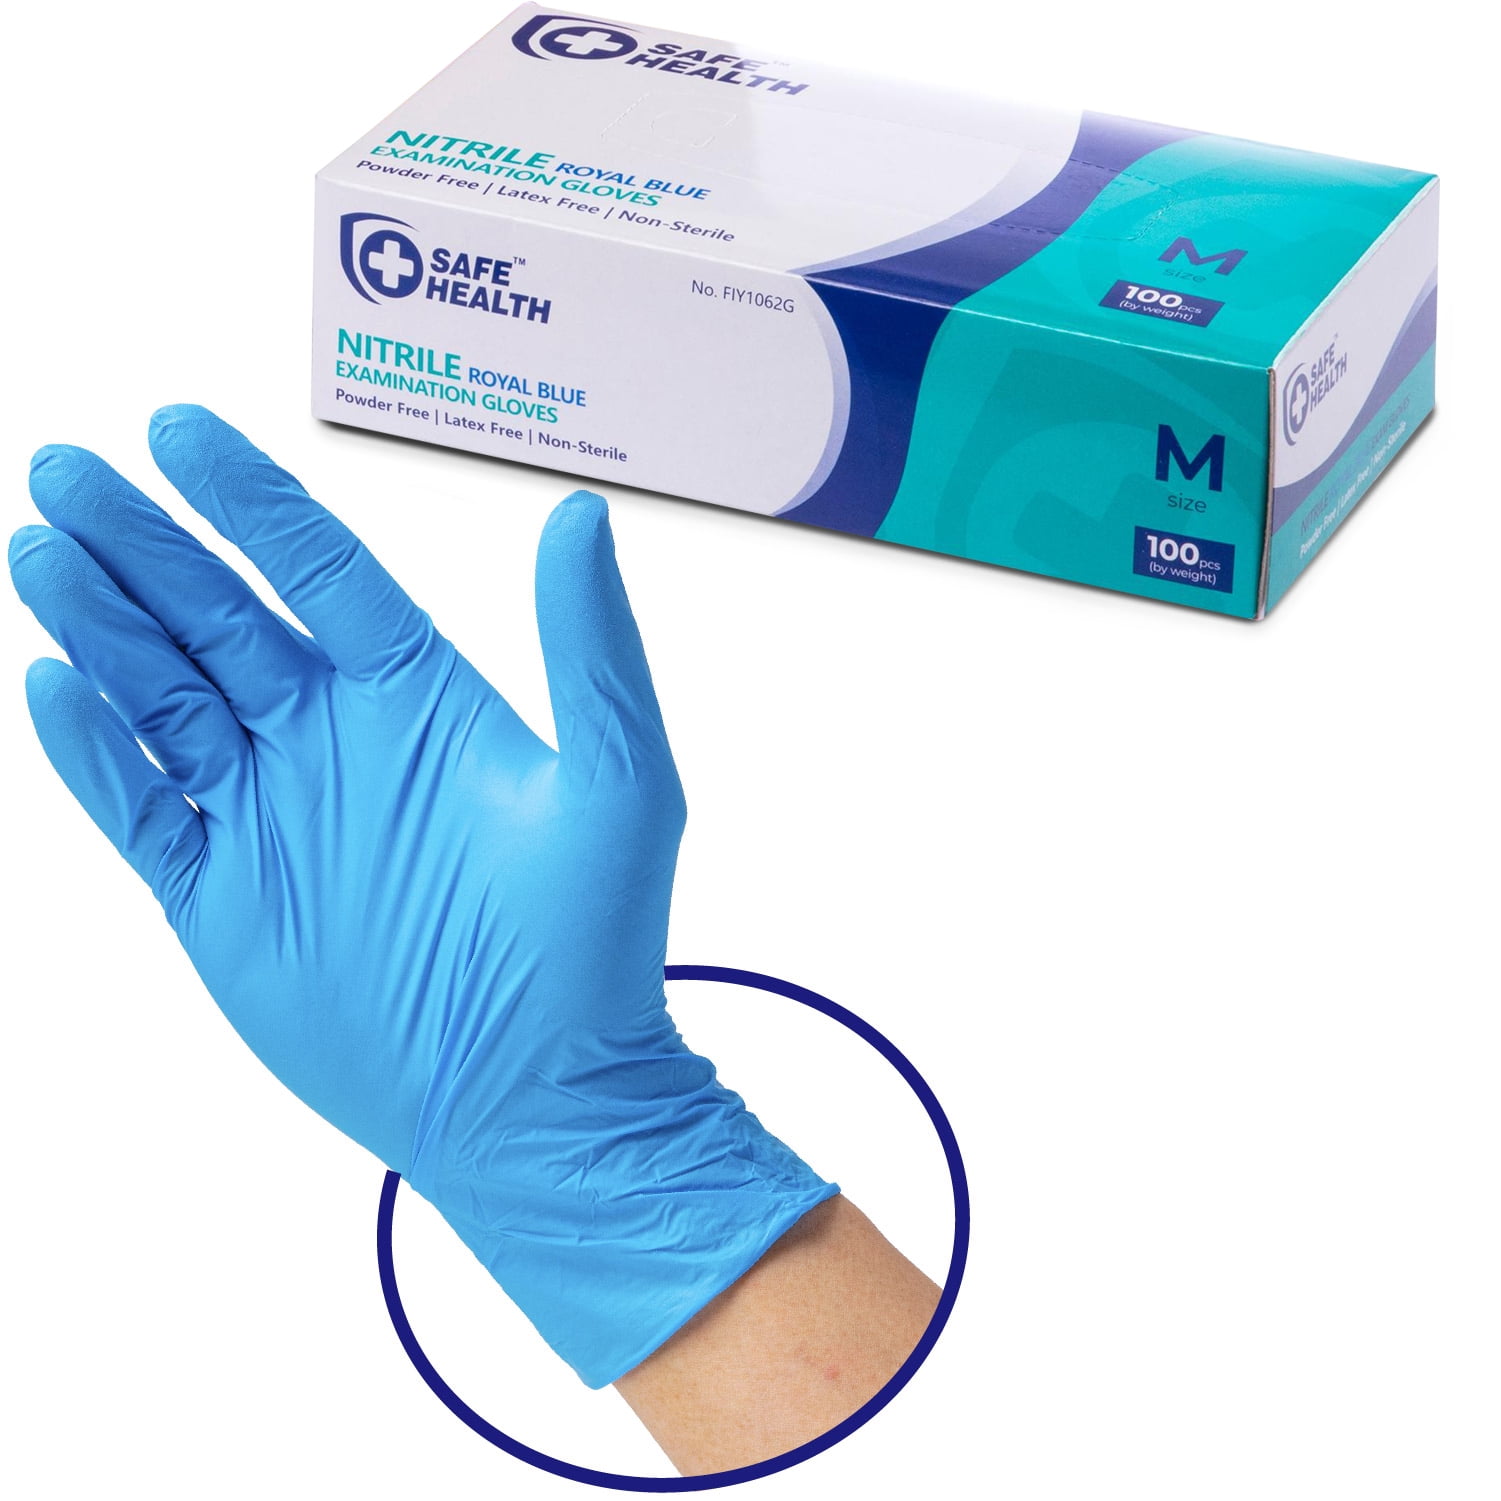 Latex-Free Cleaning or Tattoo Applications Microflex MK-296 Black Disposable Nitrile Gloves Powder-Free Glove for Mechanics Size X-X-Large/2XL Medical / Exam Grade Case of 1000 Units Automotive 